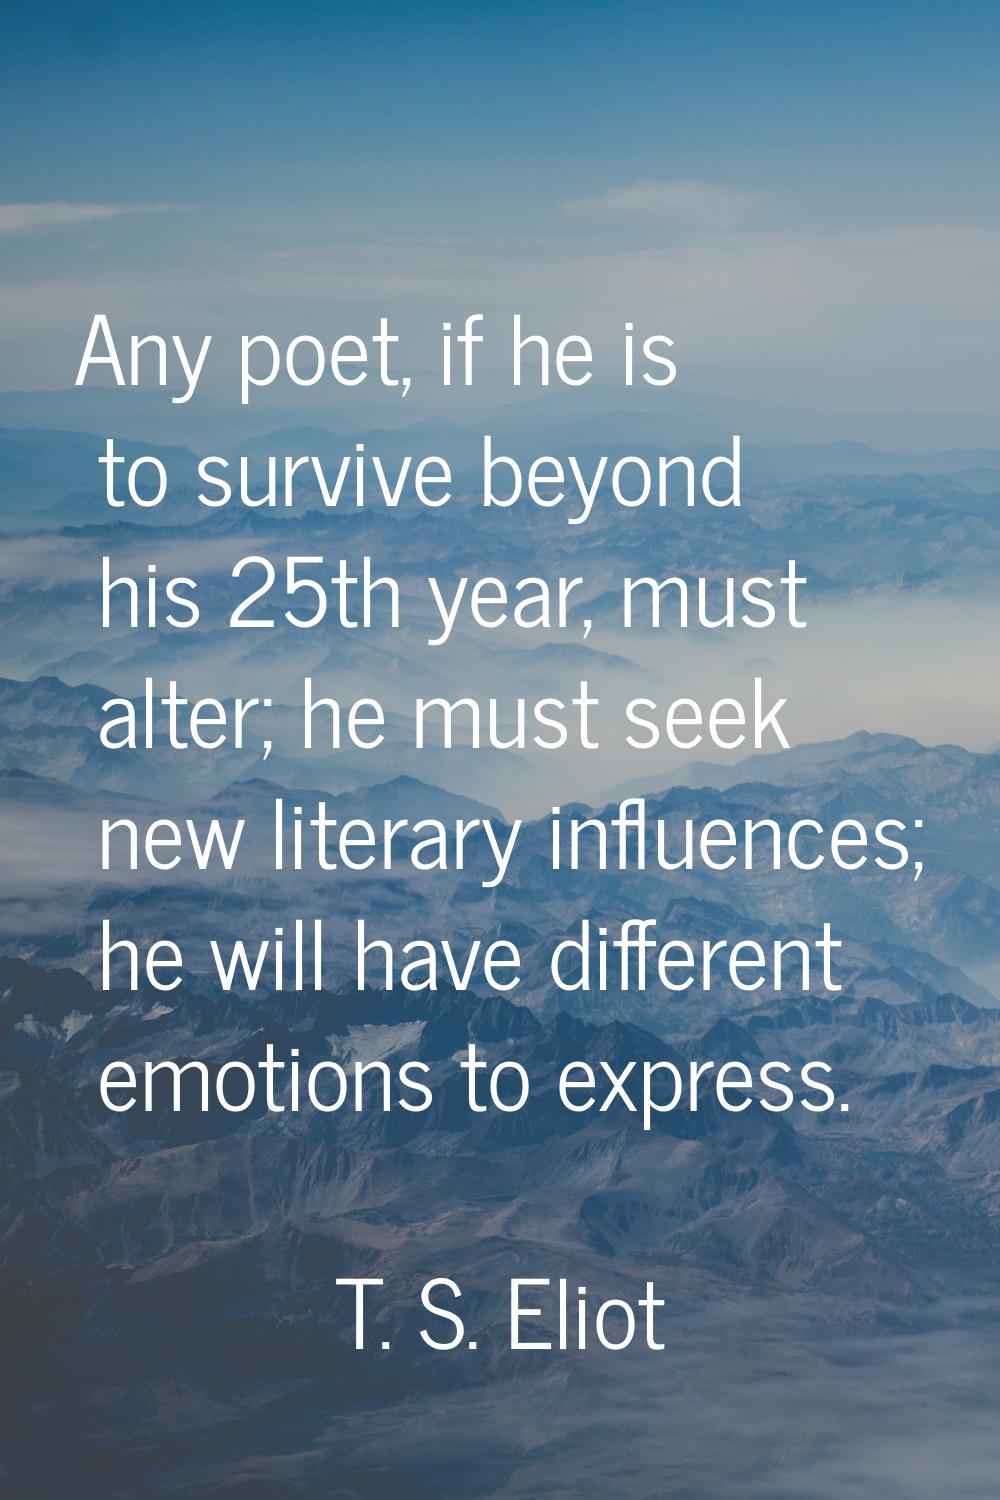 Any poet, if he is to survive beyond his 25th year, must alter; he must seek new literary influence